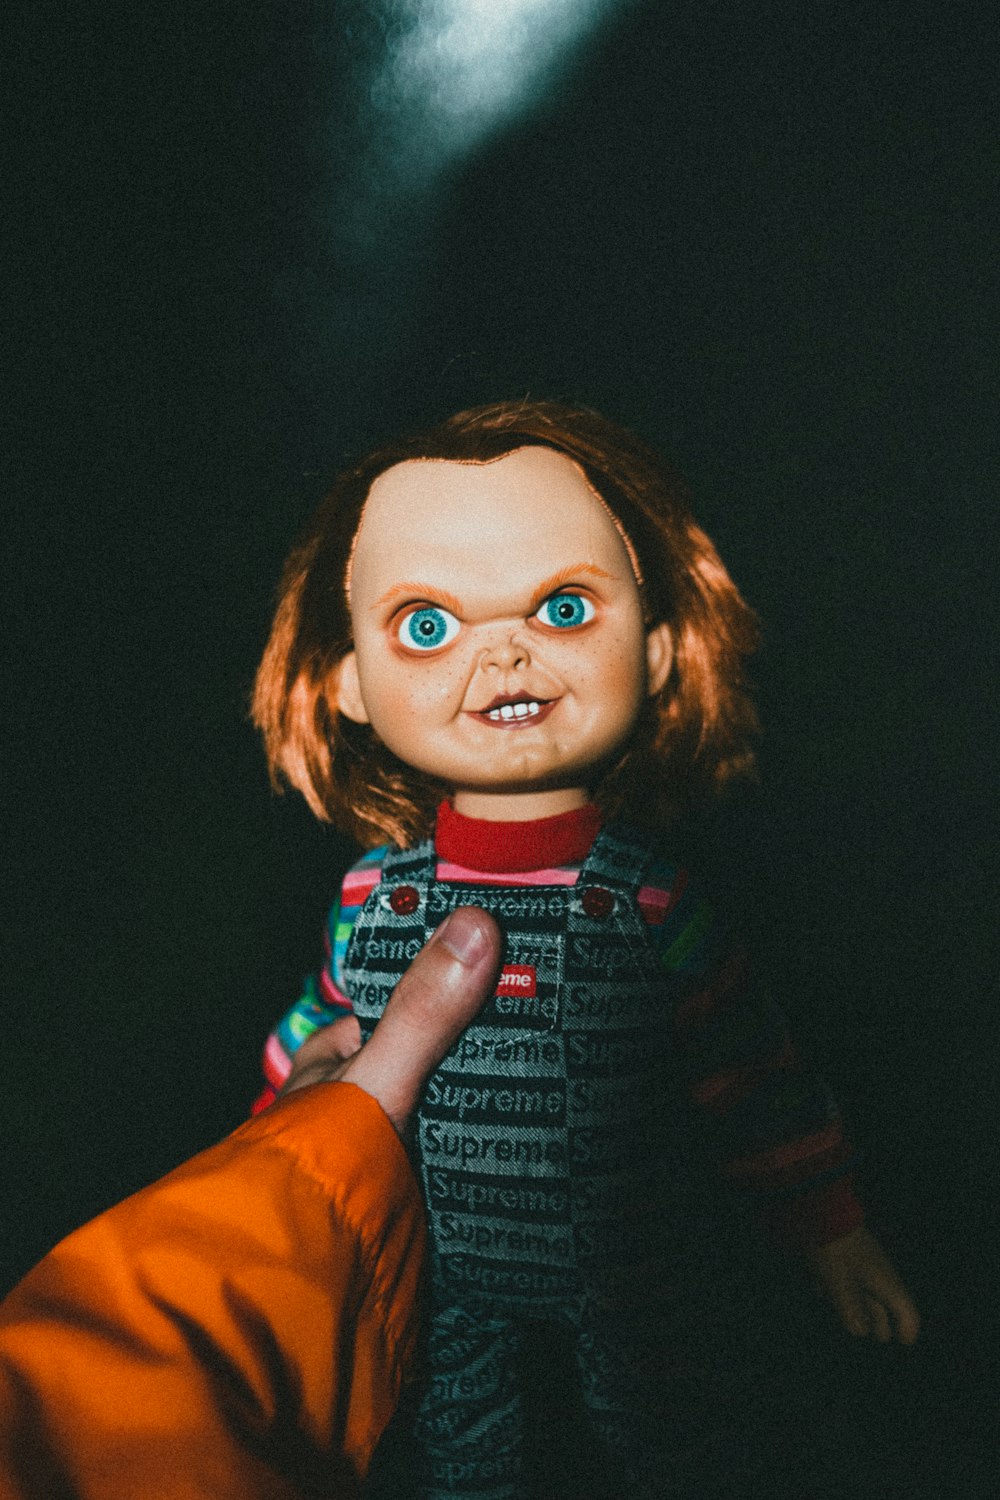 a creepy doll being held by a person